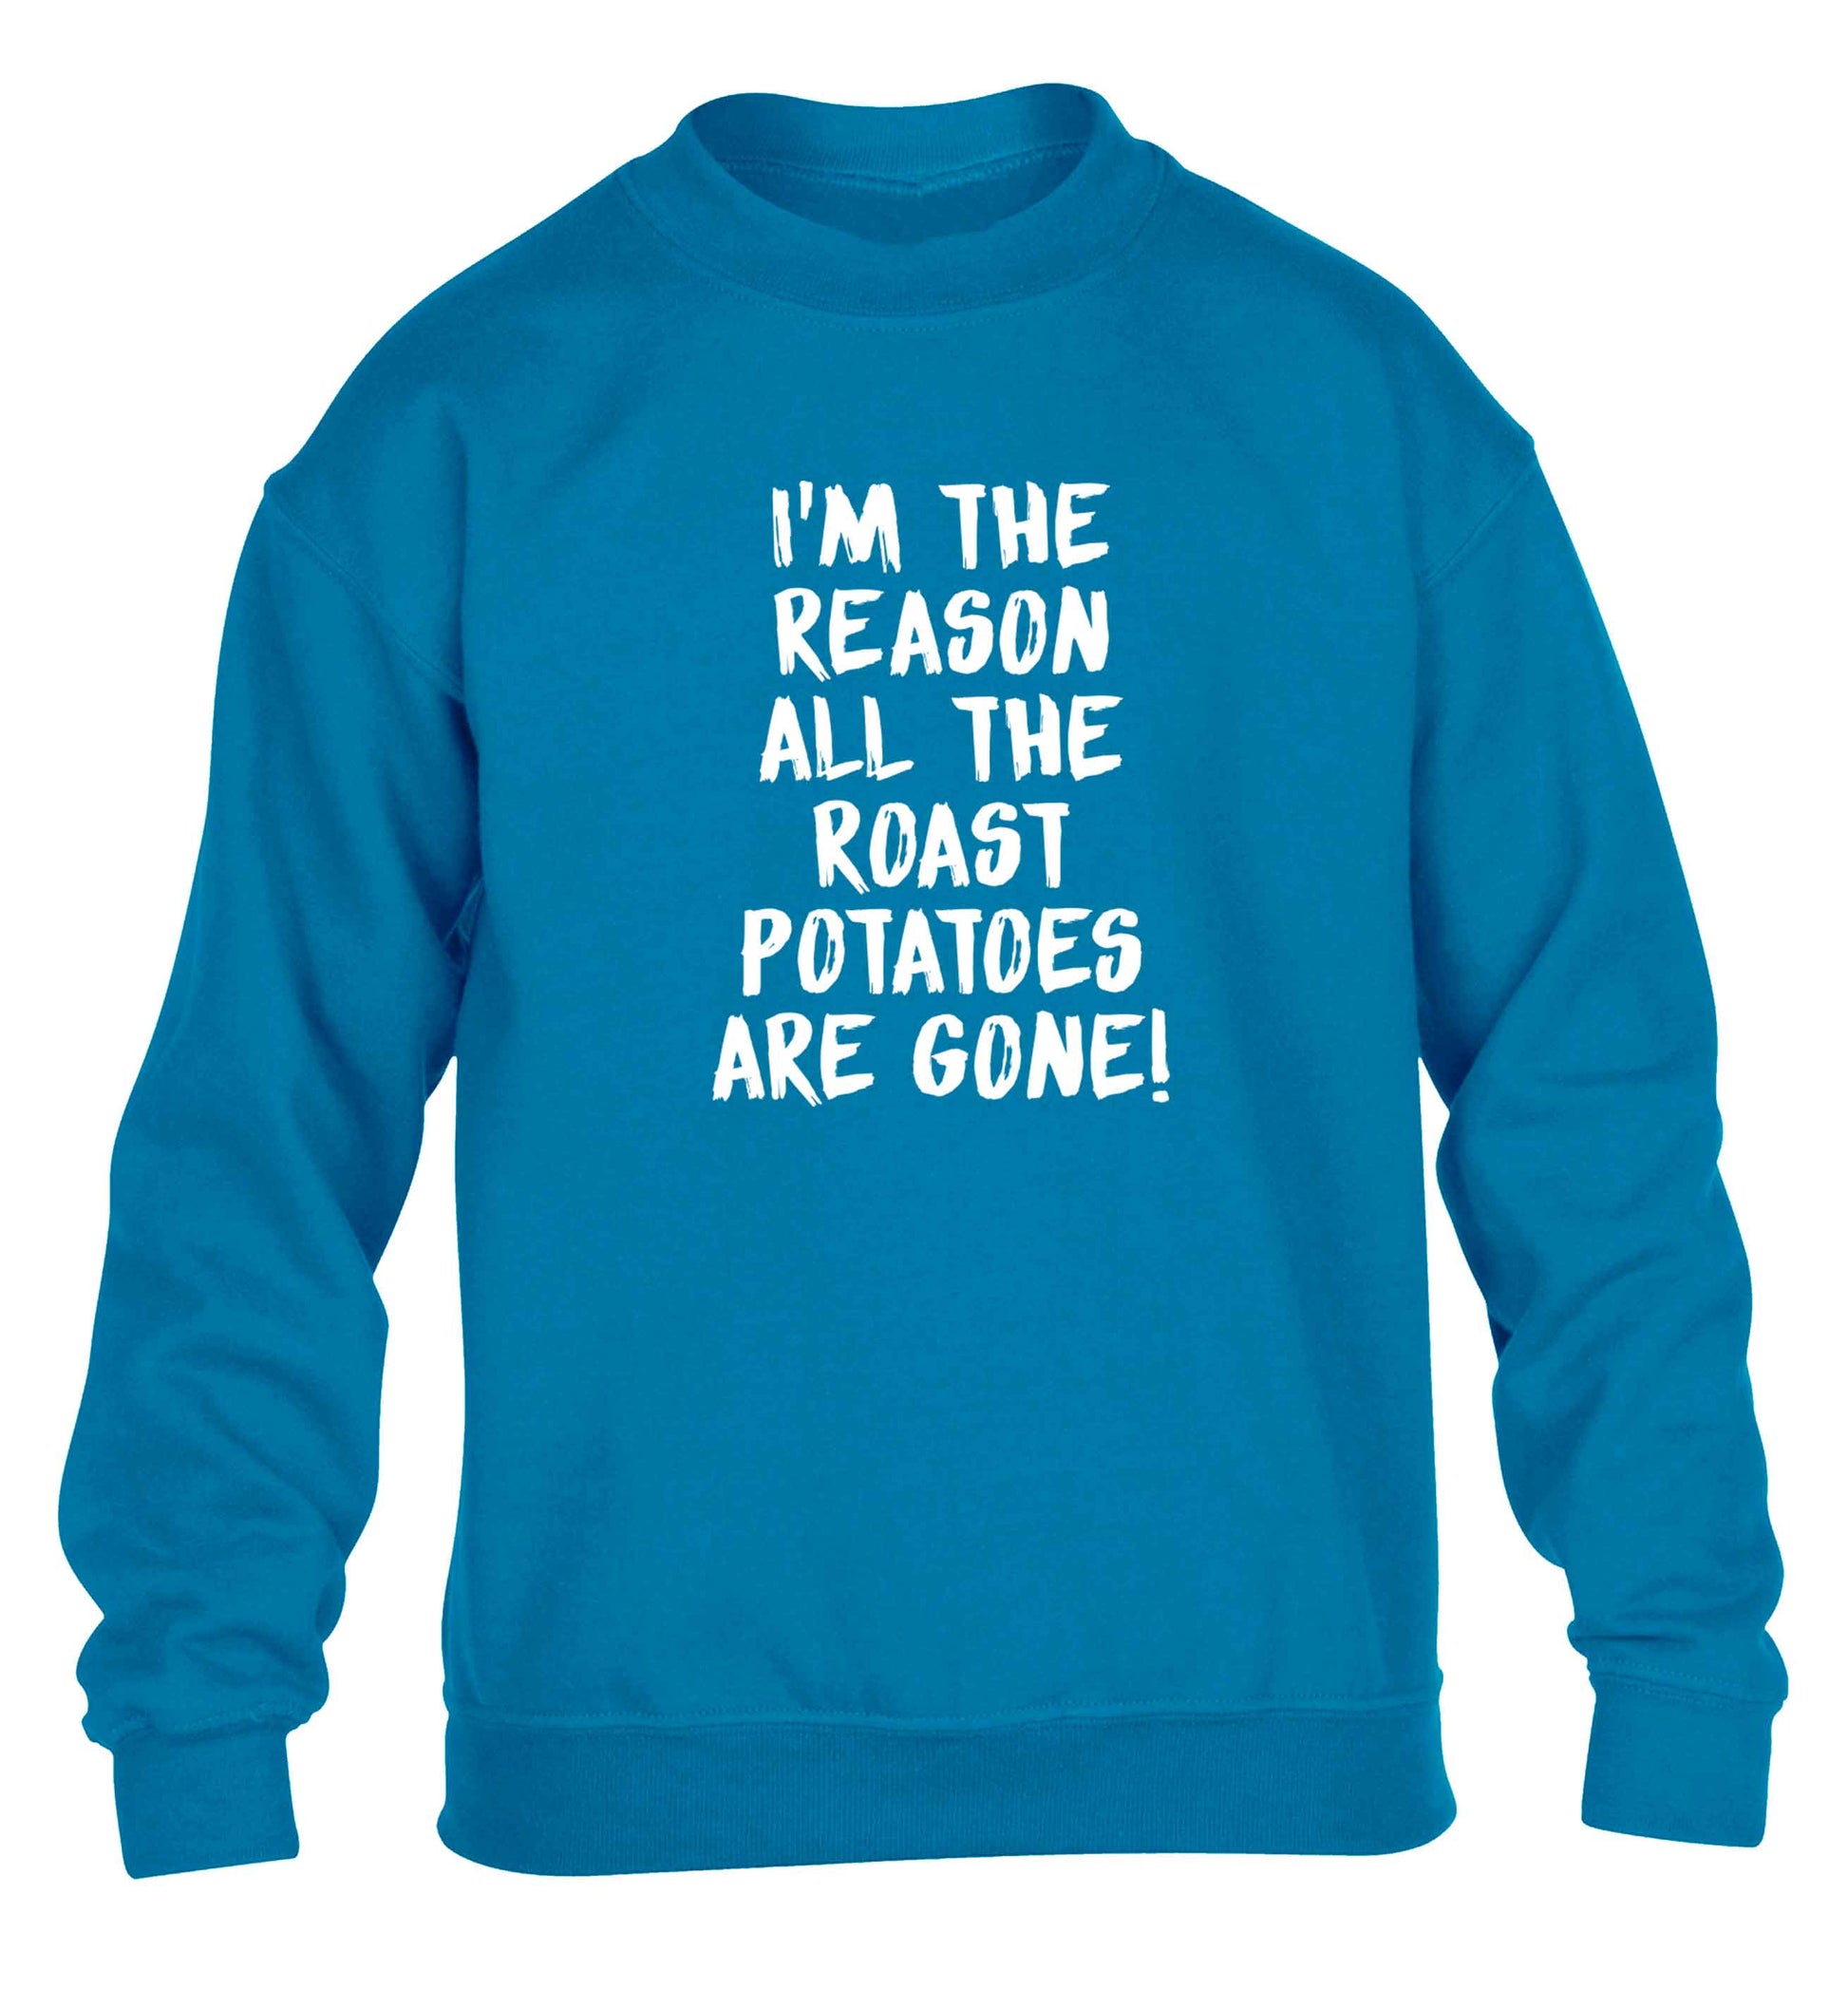 I'm the reason all the roast potatoes are gone children's blue sweater 12-13 Years